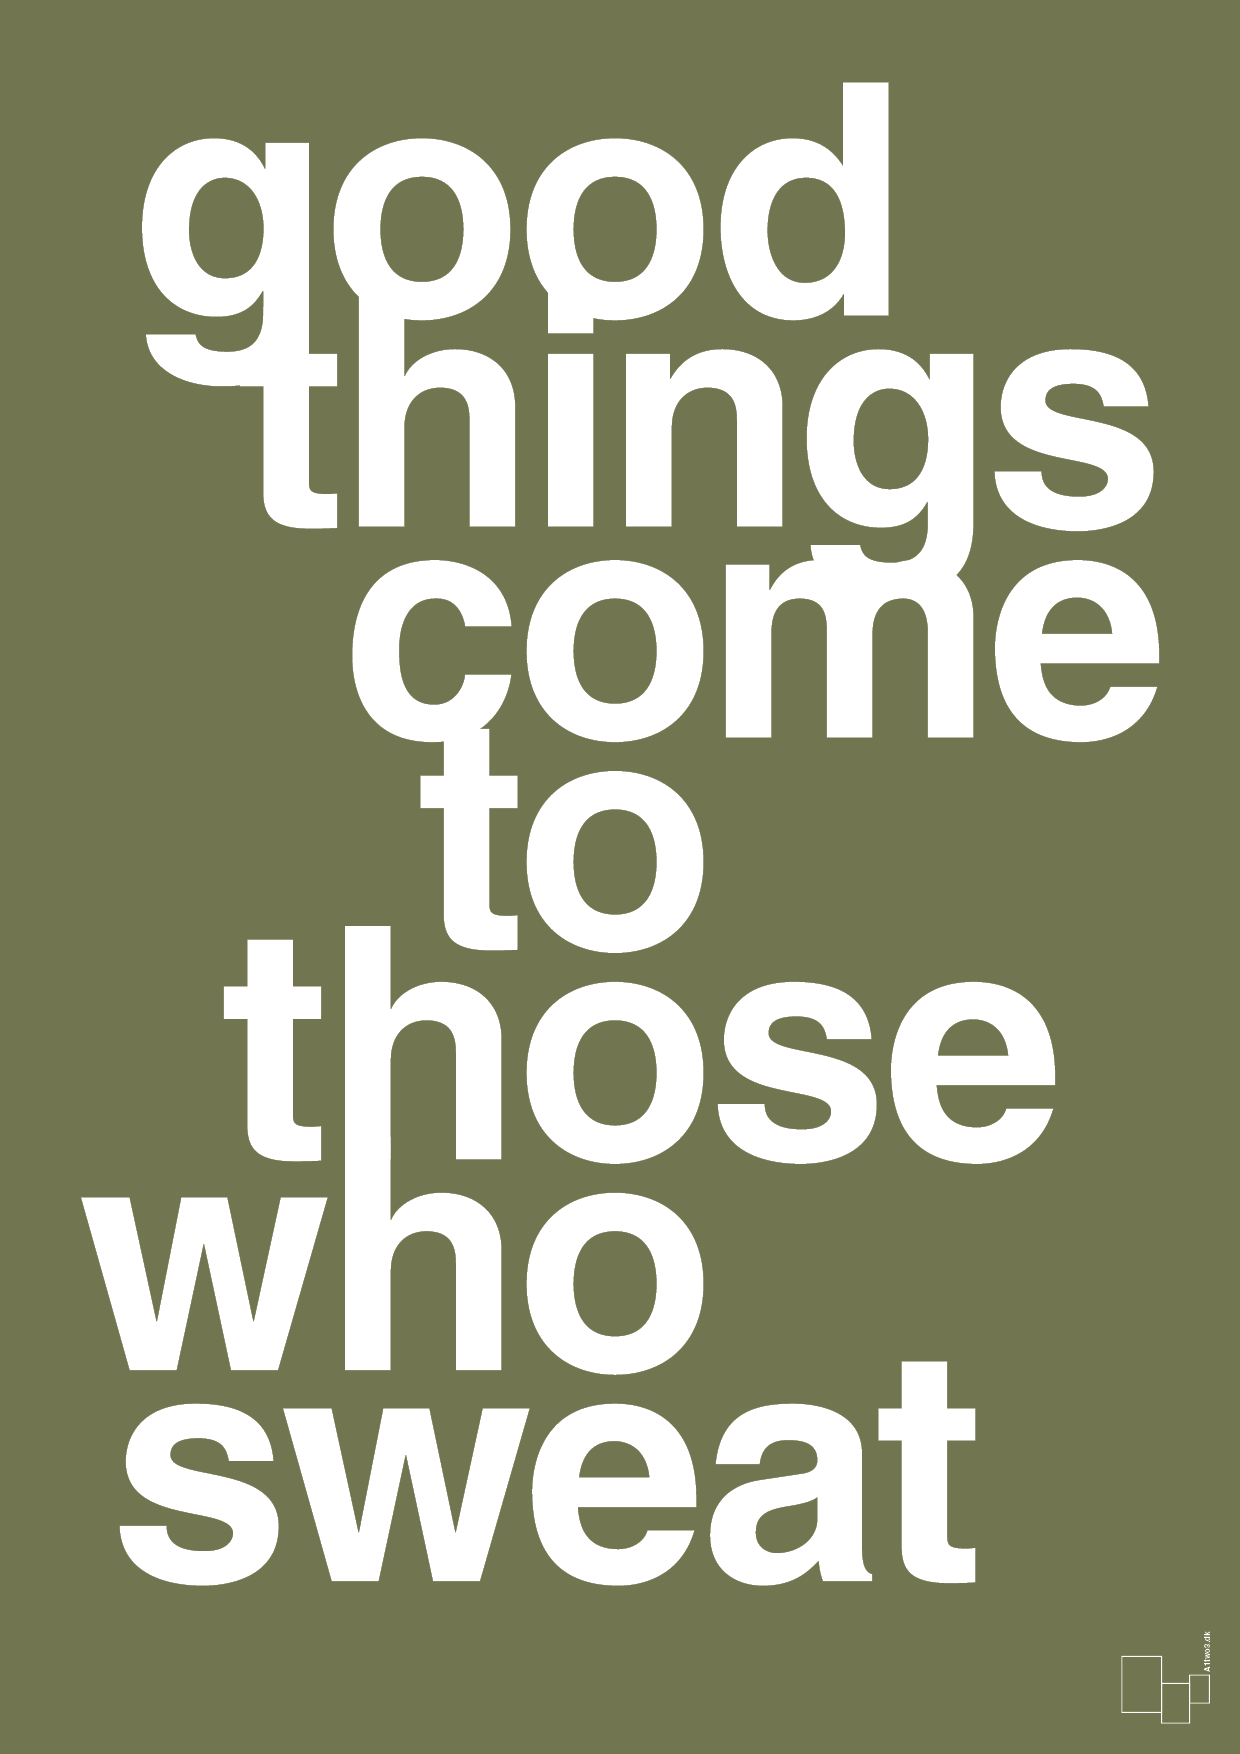 good things come to those who sweat - Plakat med Sport & Fritid i Secret Meadow